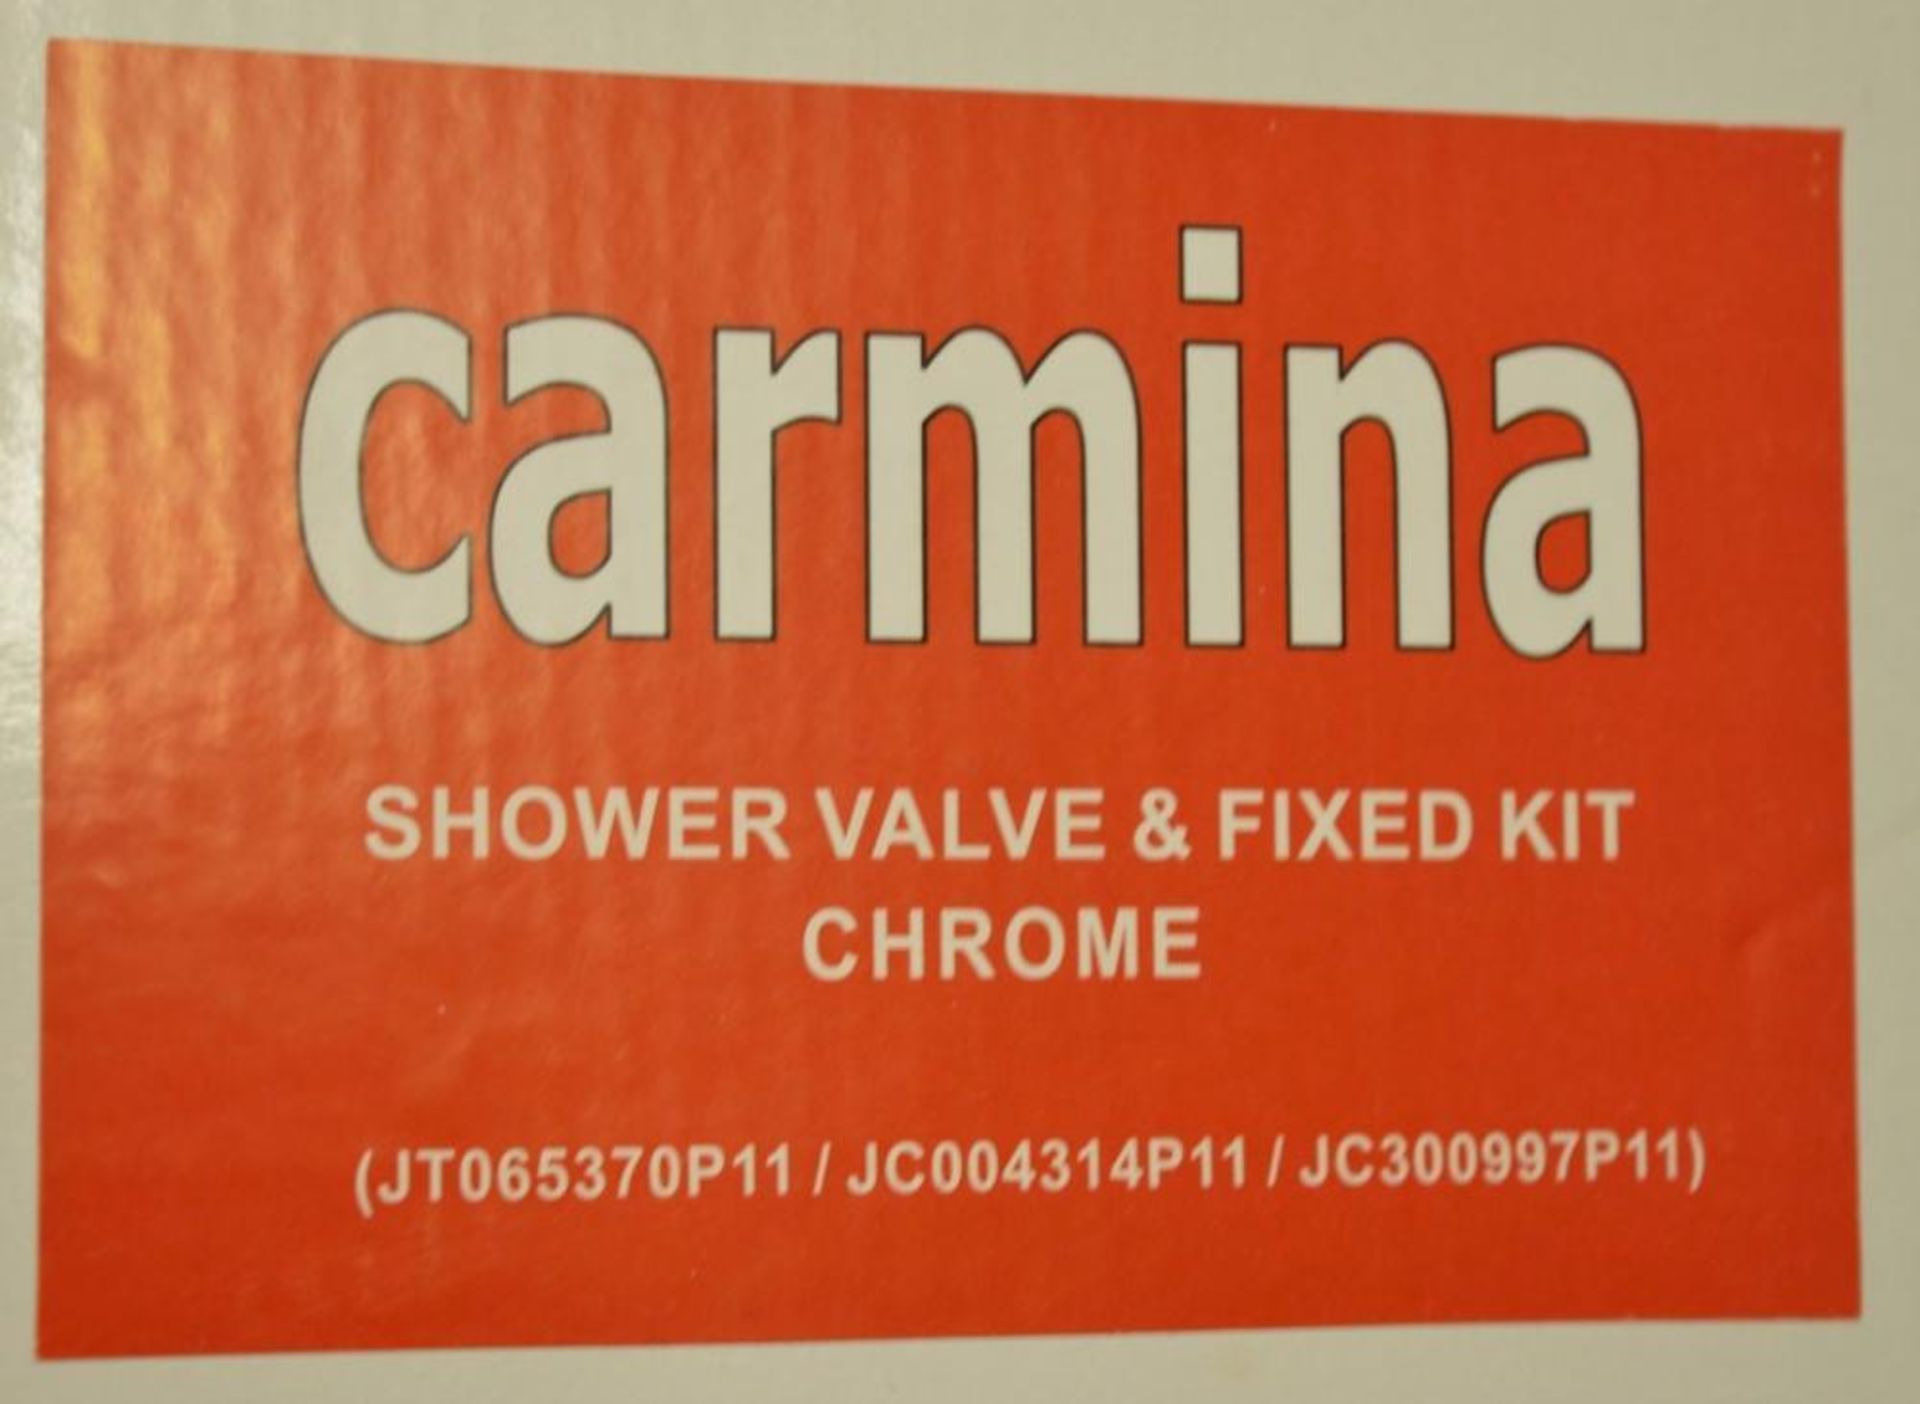 1 x Carmina Shower Valve Kit - Contains Chrome Shower Head, Fixed Arm and Manual Control - Brass Con - Image 12 of 13